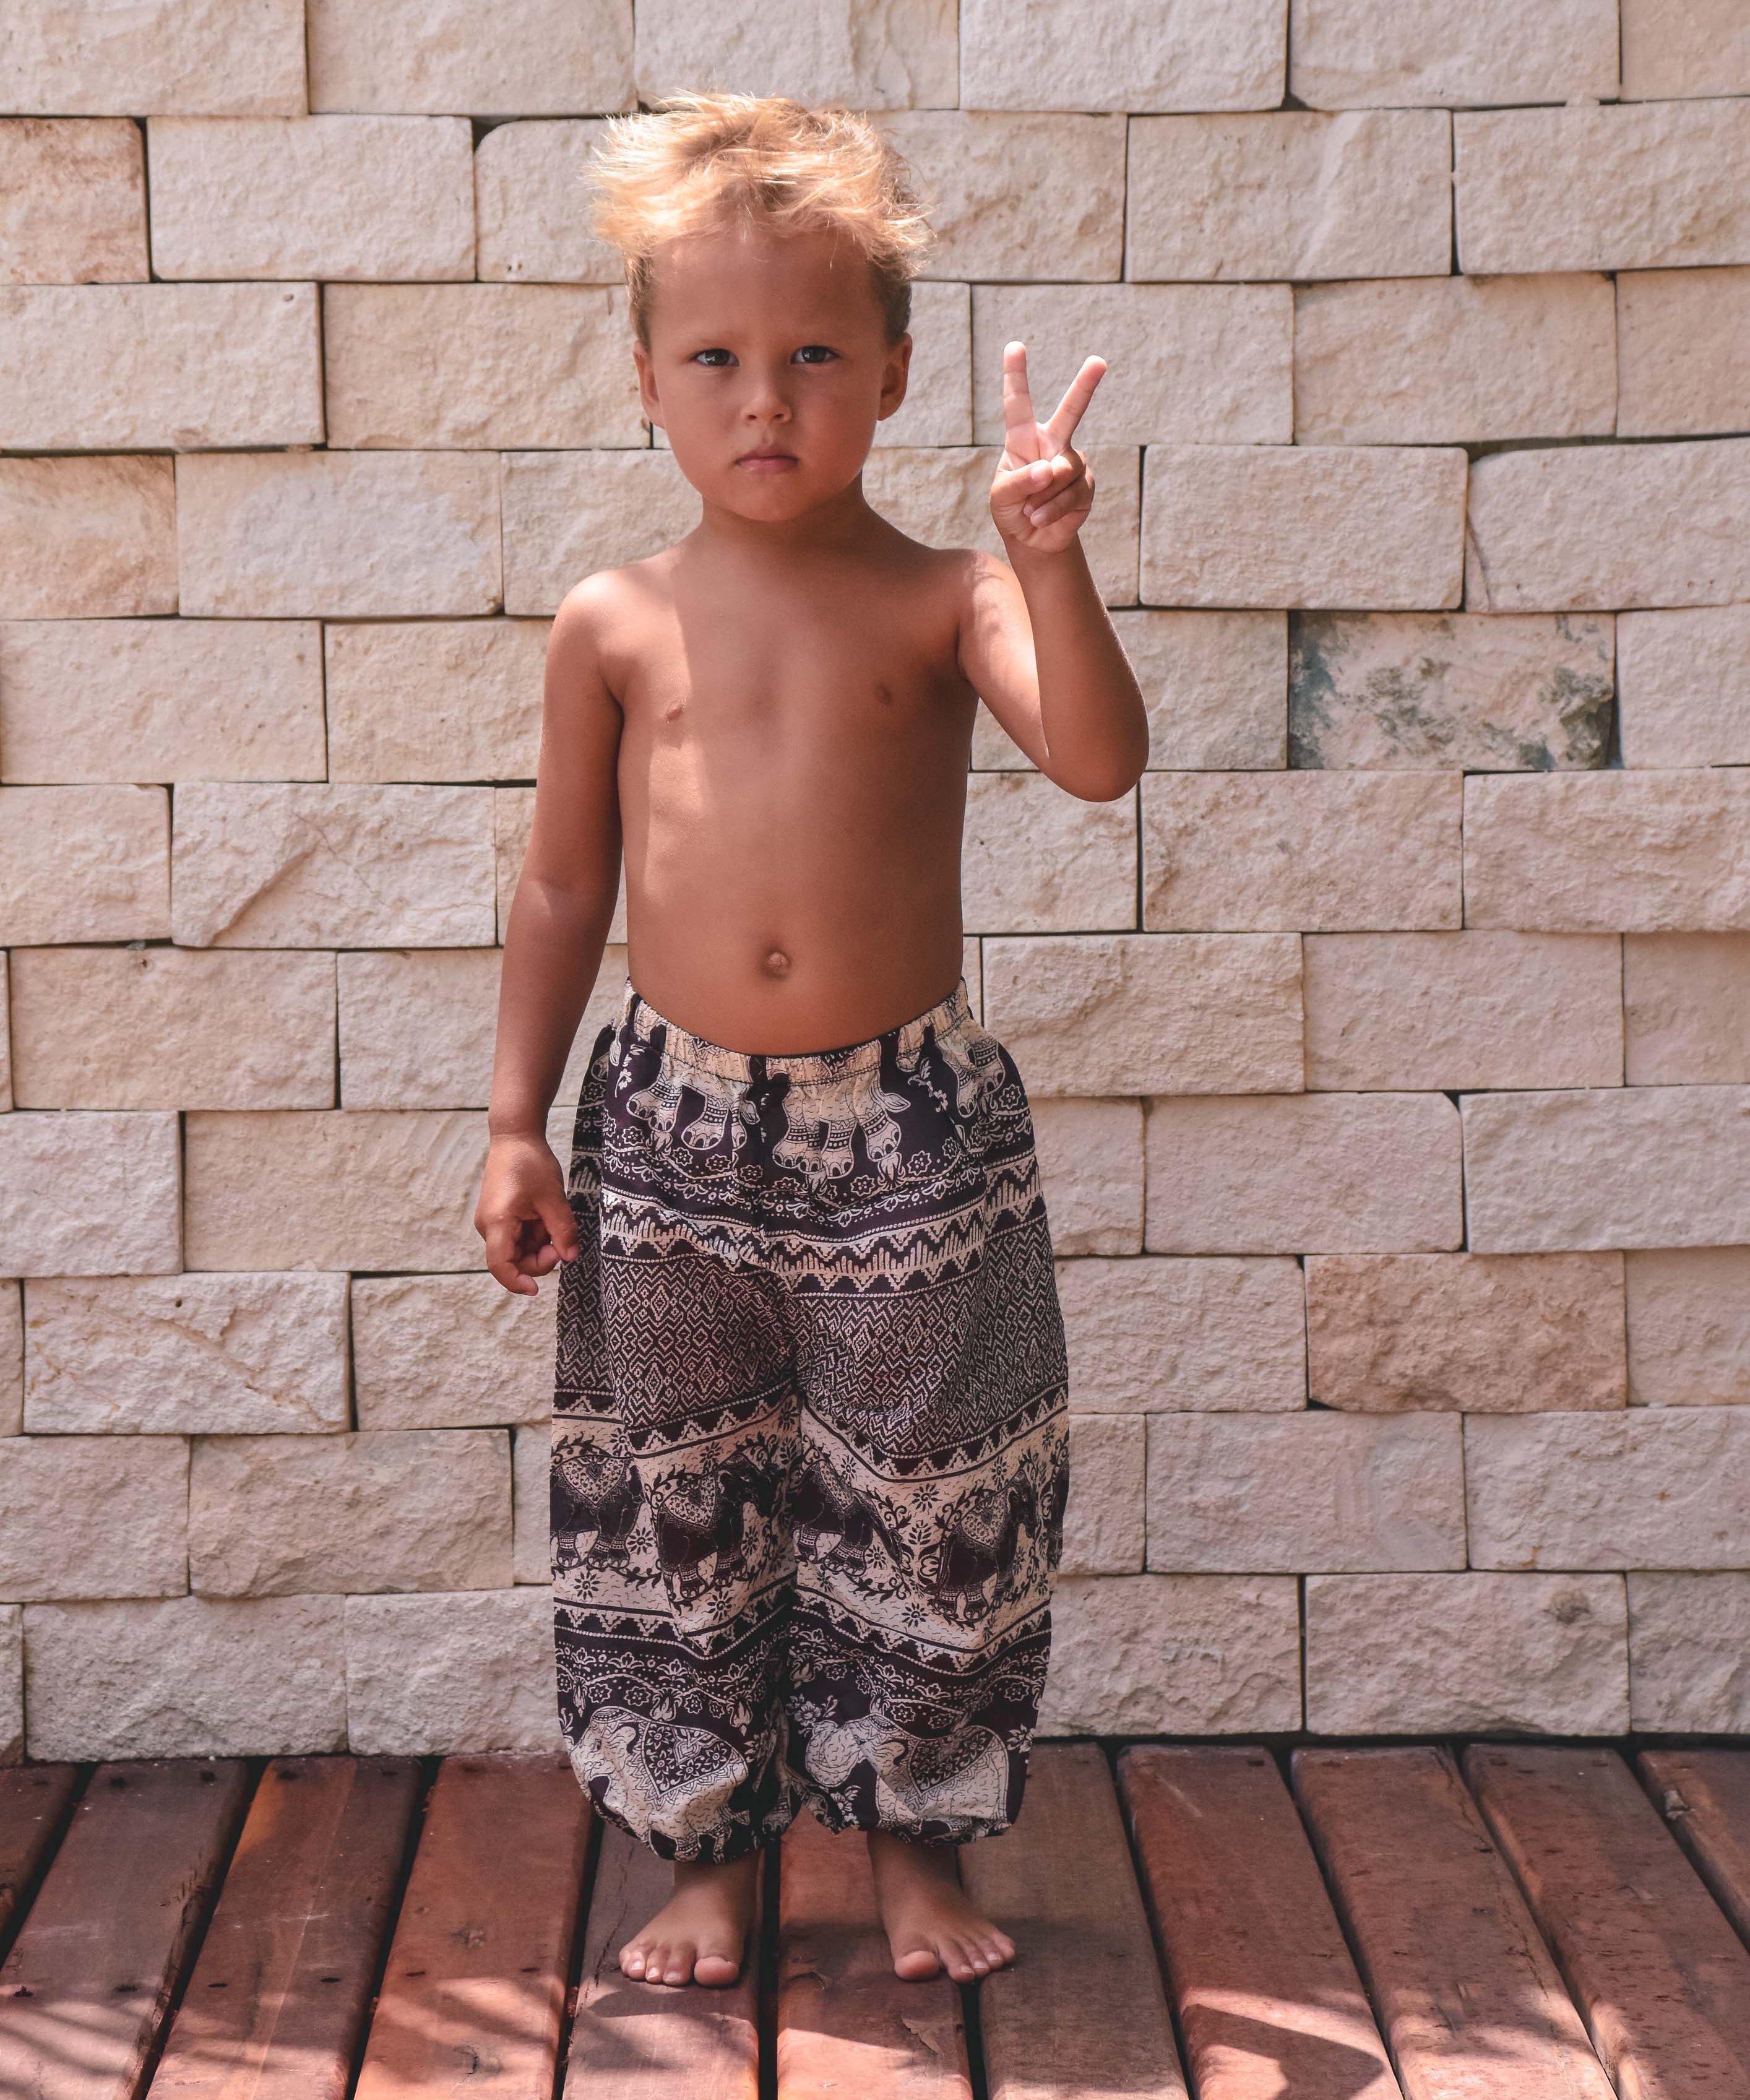 PERSIA PANTS Elepanta Kids Pants - Buy Today Elephant Pants Jewelry And Bohemian Clothes Handmade In Thailand Help To Save The Elephants FairTrade And Vegan